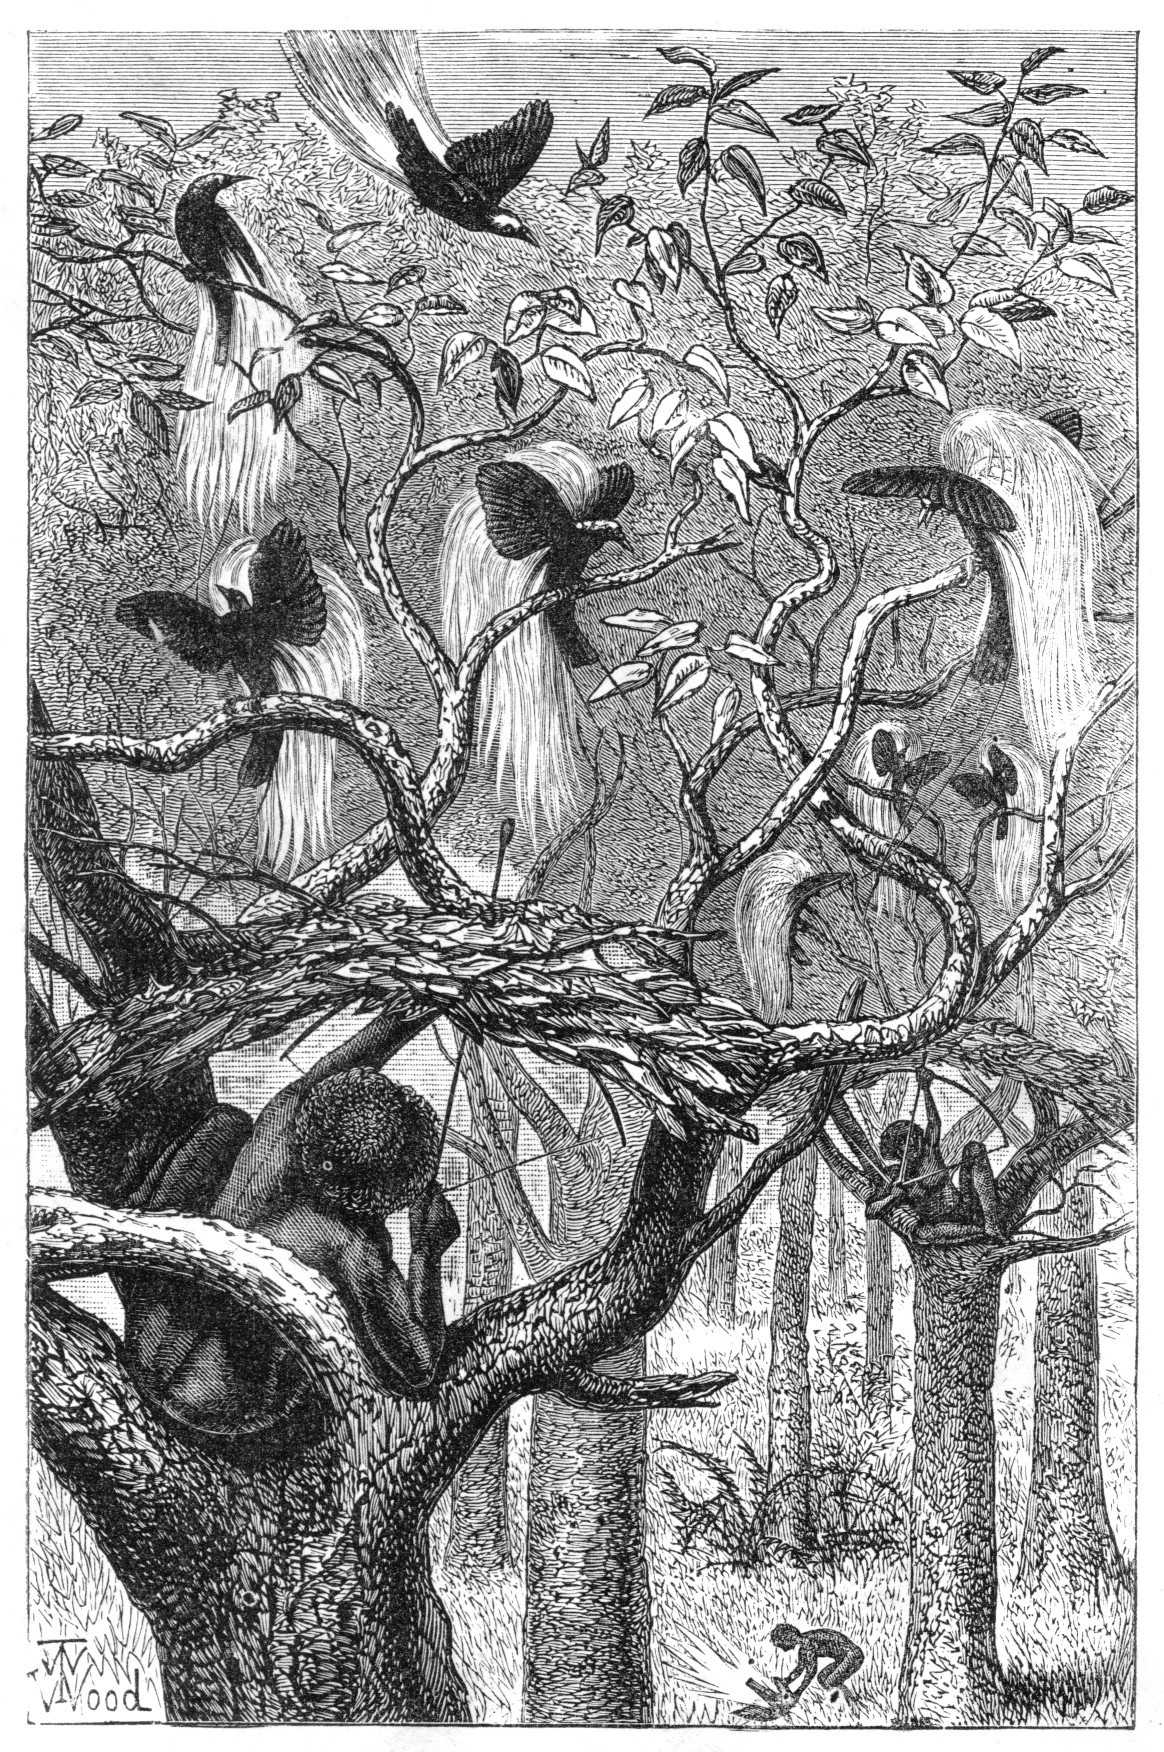   This drawing, by natural-history illustrator Thomas Wood, appeared in Wallace’s 1869 magnum opus, “The Malay Archipelago.” It was titled “Natives of Aru shooting the great bird of paradise.”